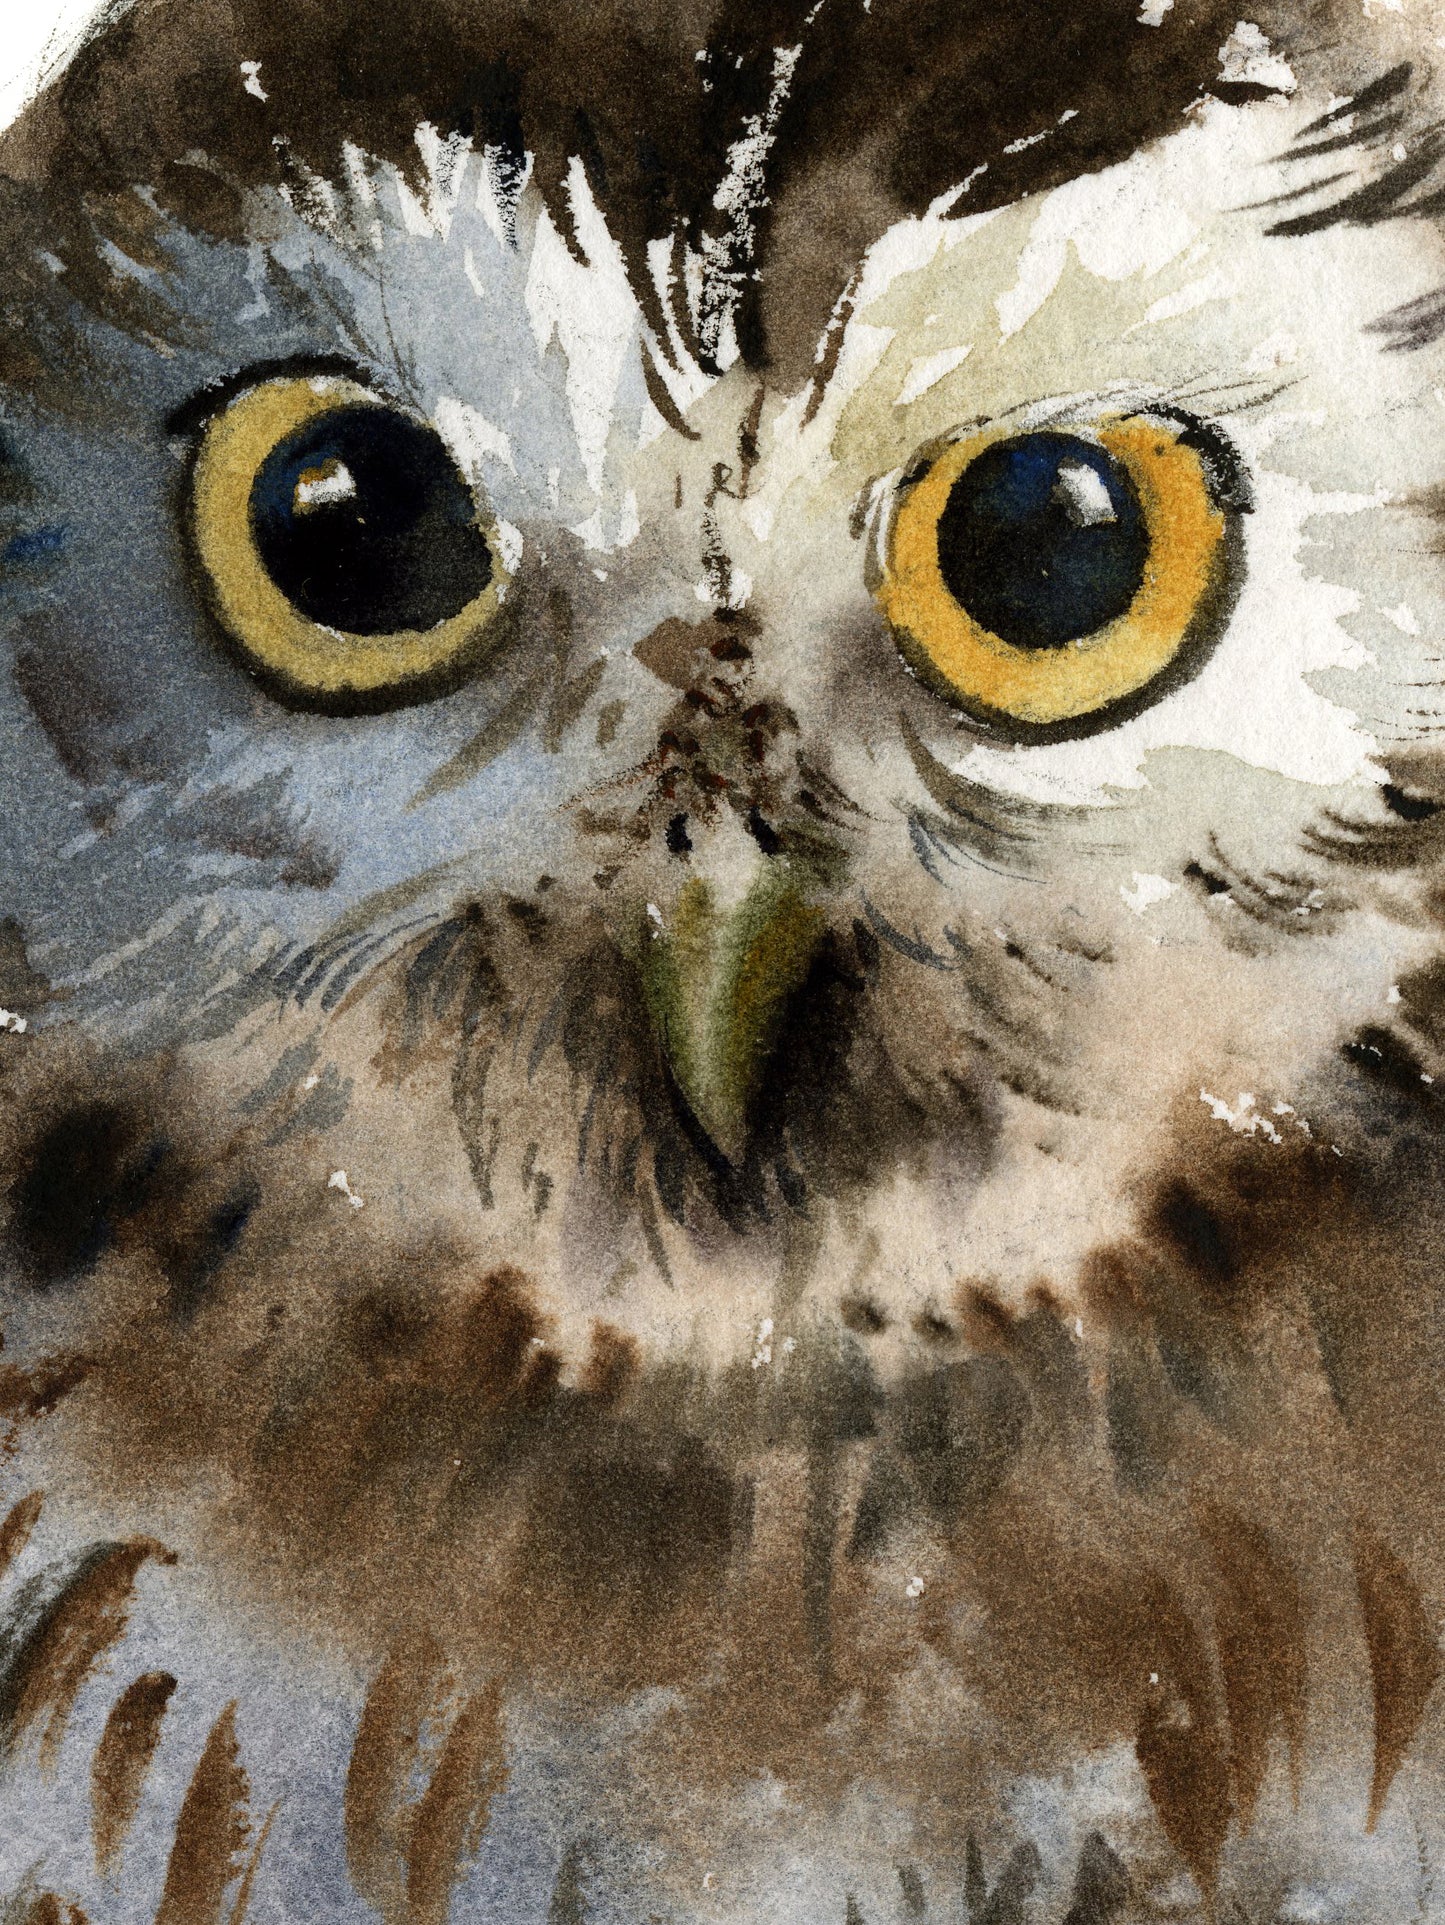 Whimsical Owl Painting Print - Museum-Quality Art Paper and Canvas Options